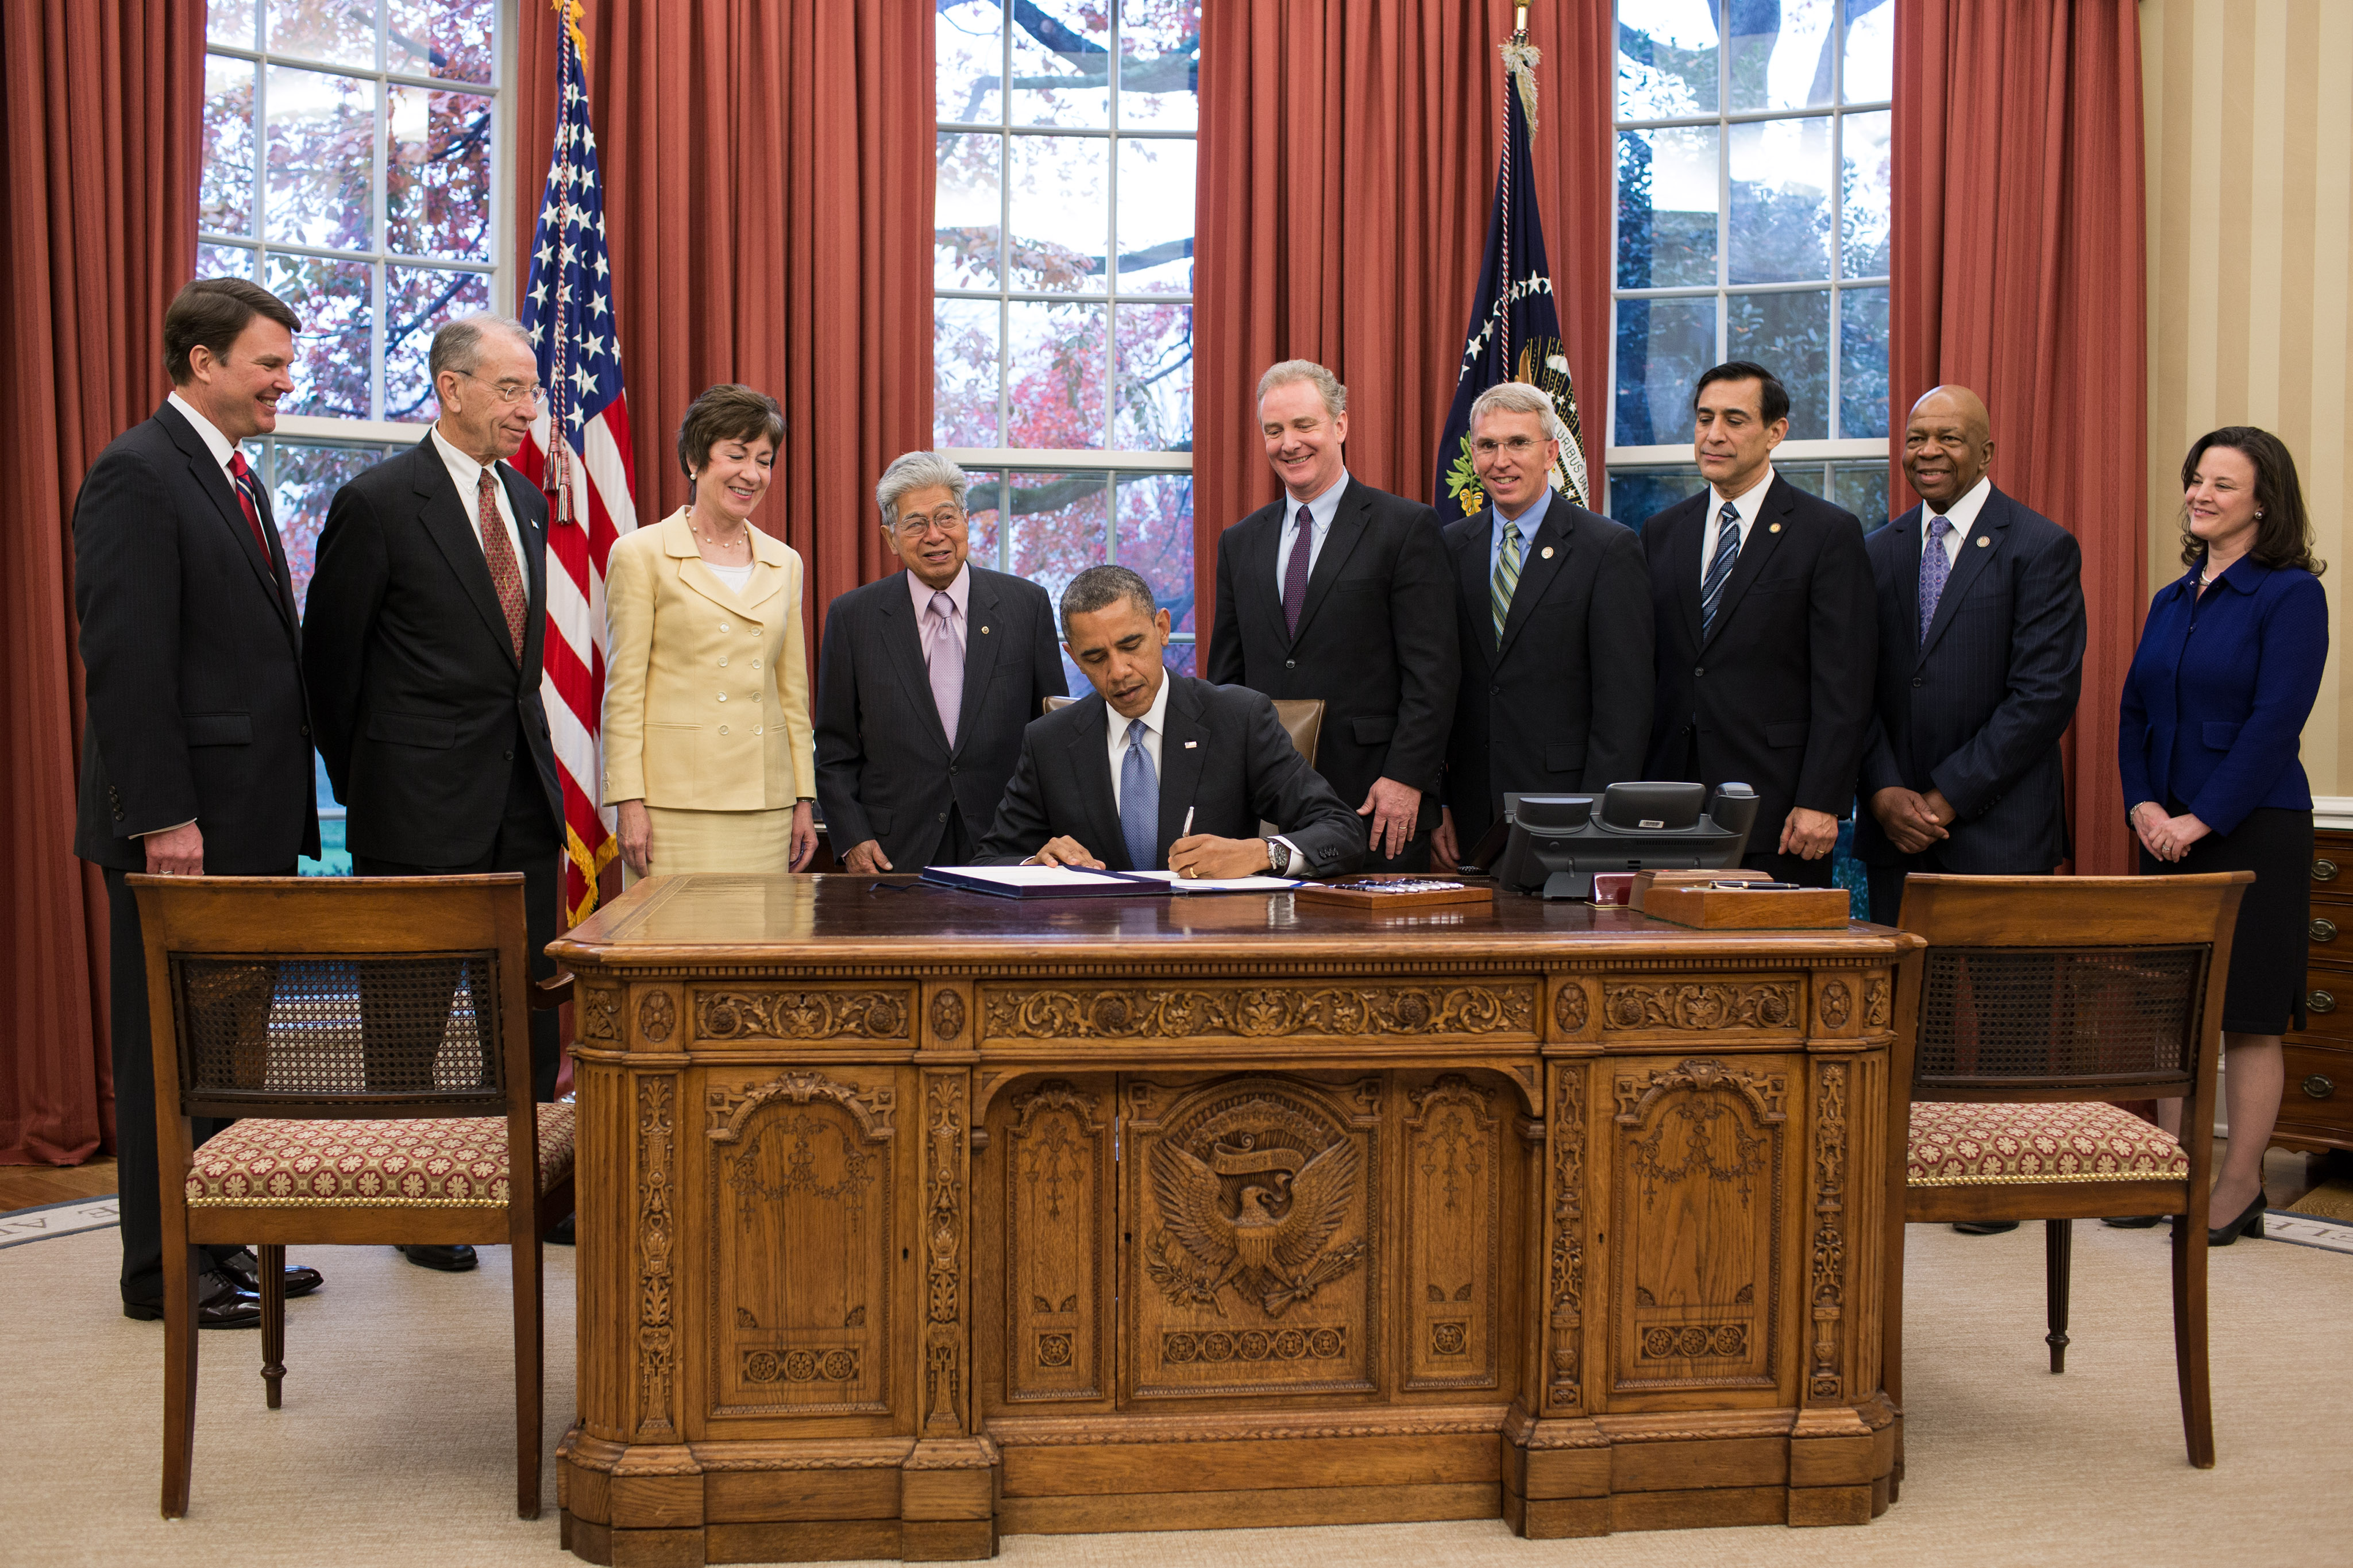 President Obama Signs Senator Akaka's Whistleblower Protection Enhancement Act into Law in Oval Office Ceremony